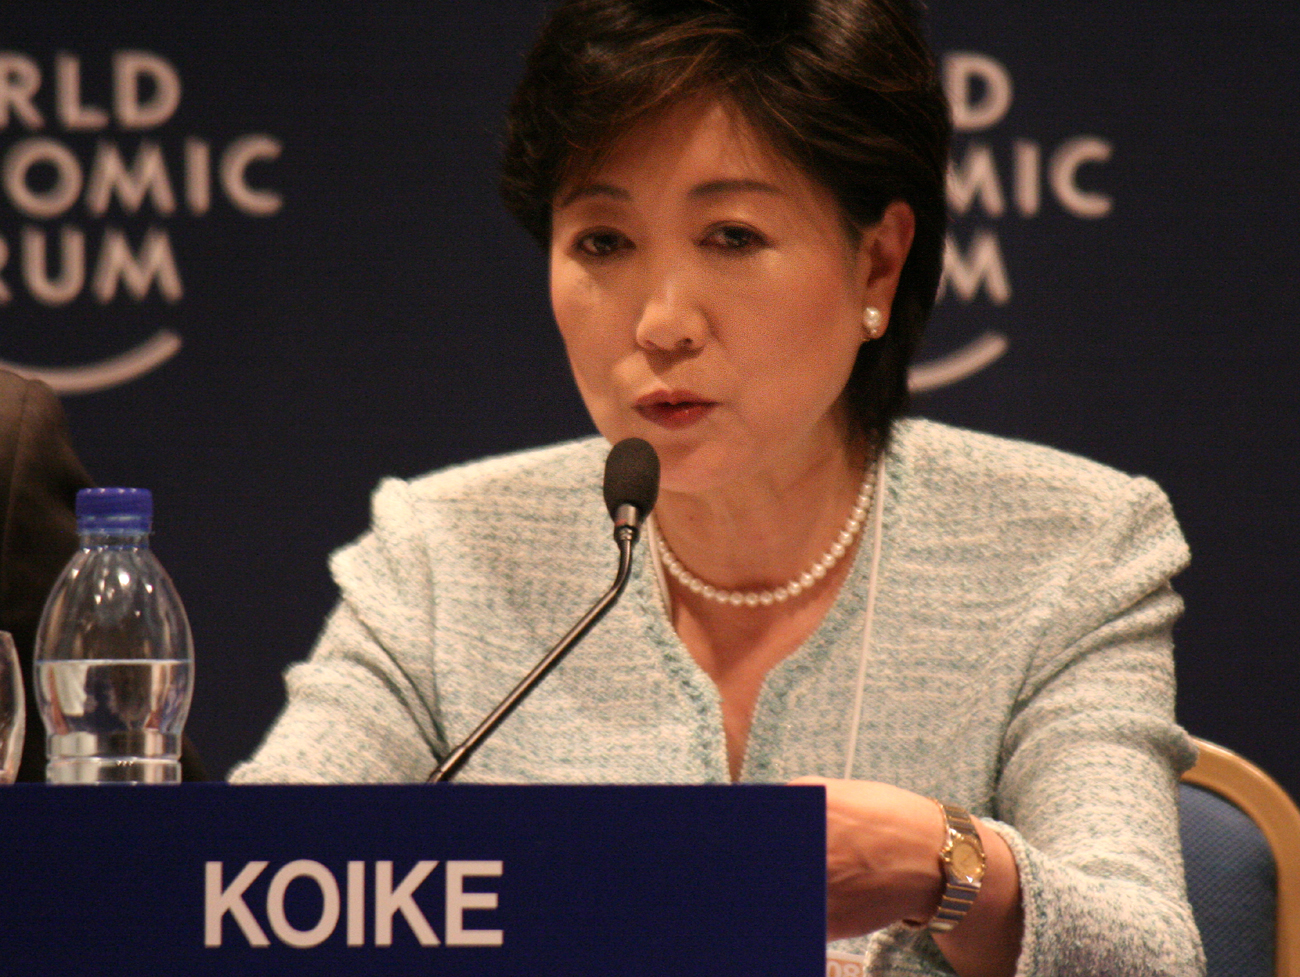 Tokyo Governor Yuriko Koike. By Copyright by World Economic Forum (www.weforum.org) - originally posted to Flickr as Yuriko Koike - World Economic Forum on the Middle East 2008, CC BY-SA 2.0, https://commons.wikimedia.org/w/index.php?curid=4482282